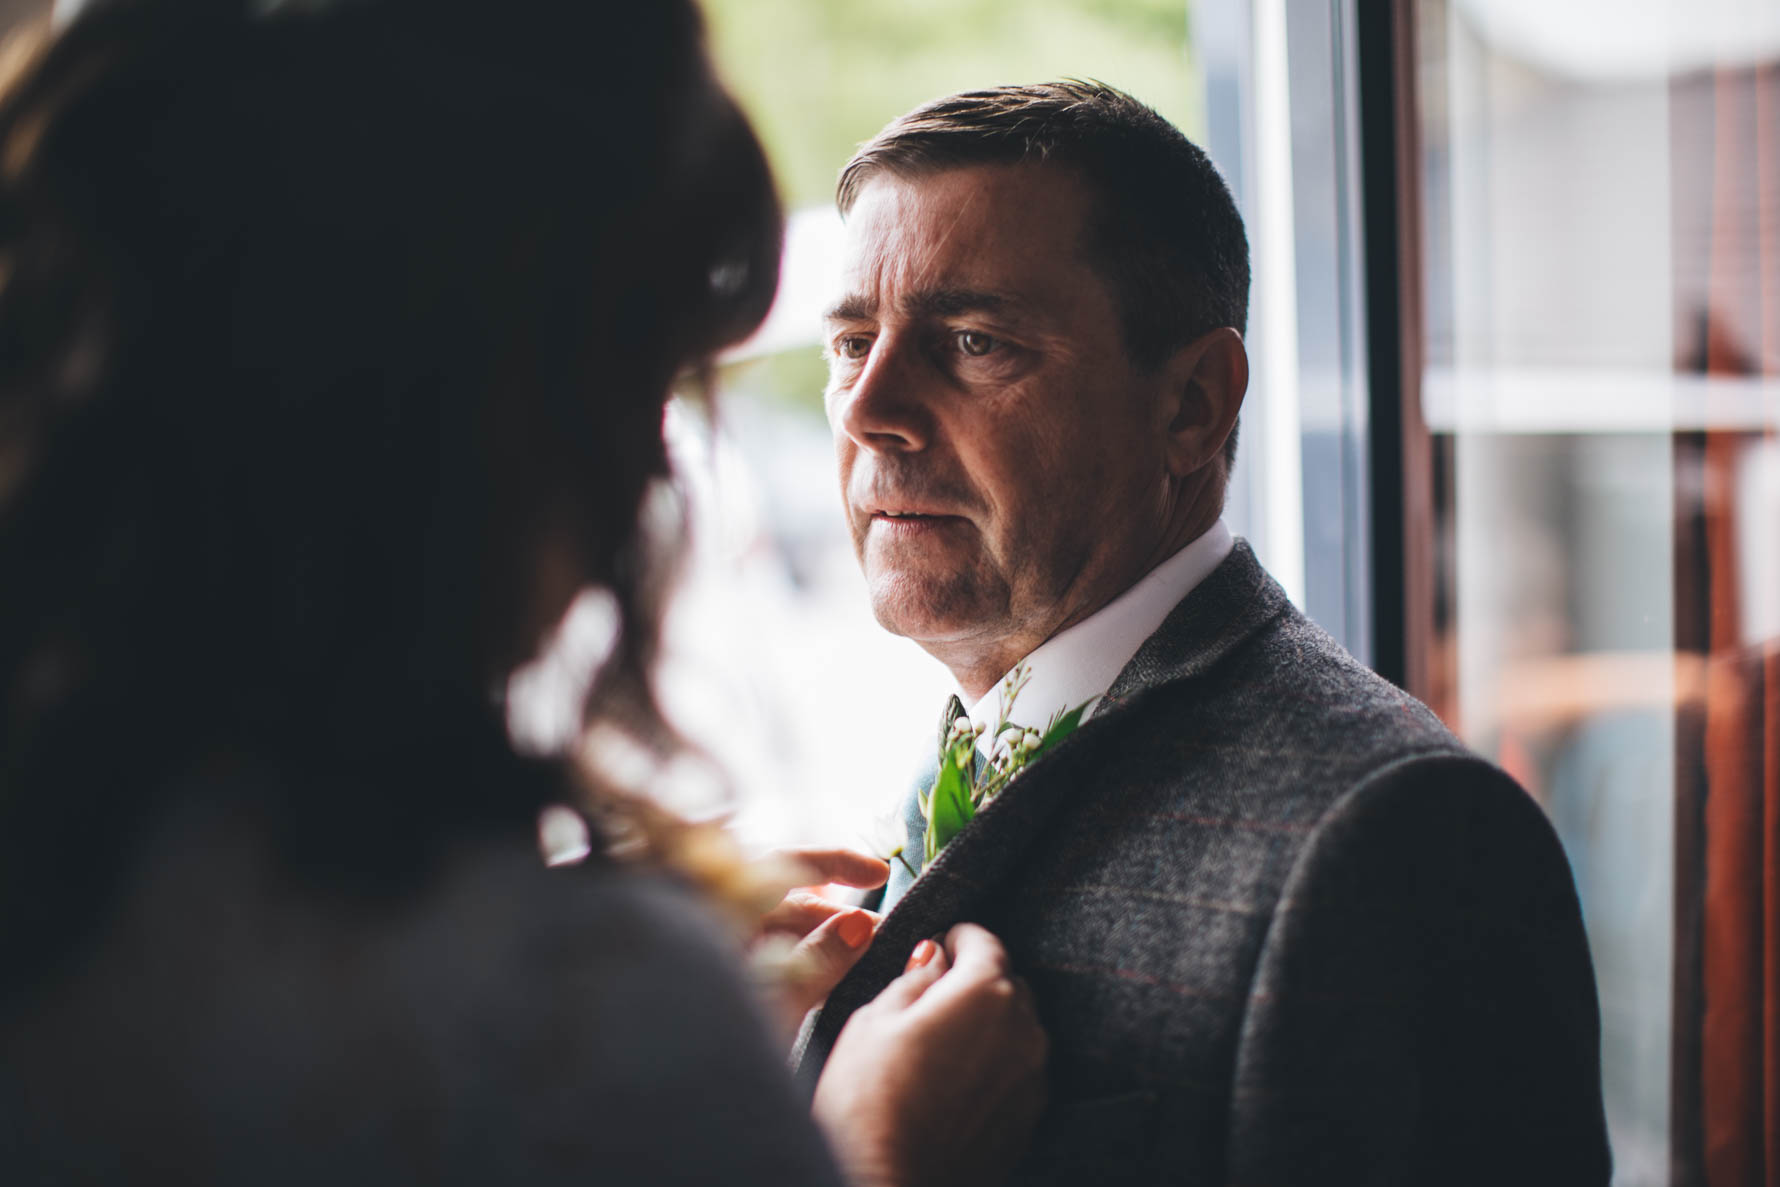 Father of the bride having his buttonhole put onto his suit lapel by the bride